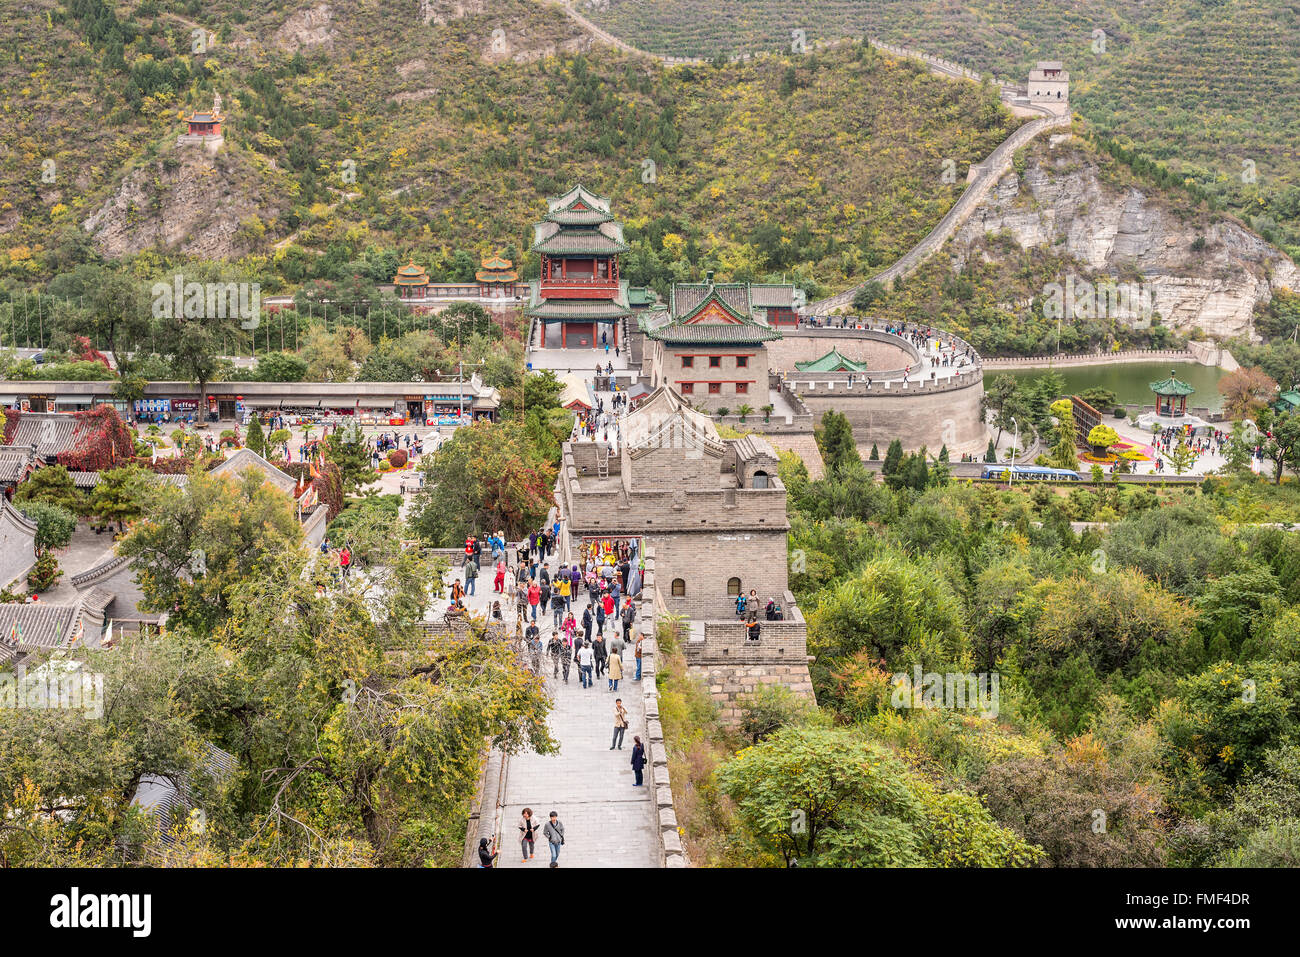 A view of the Great Wall in Beijing, China on a cloudy day Stock Photo